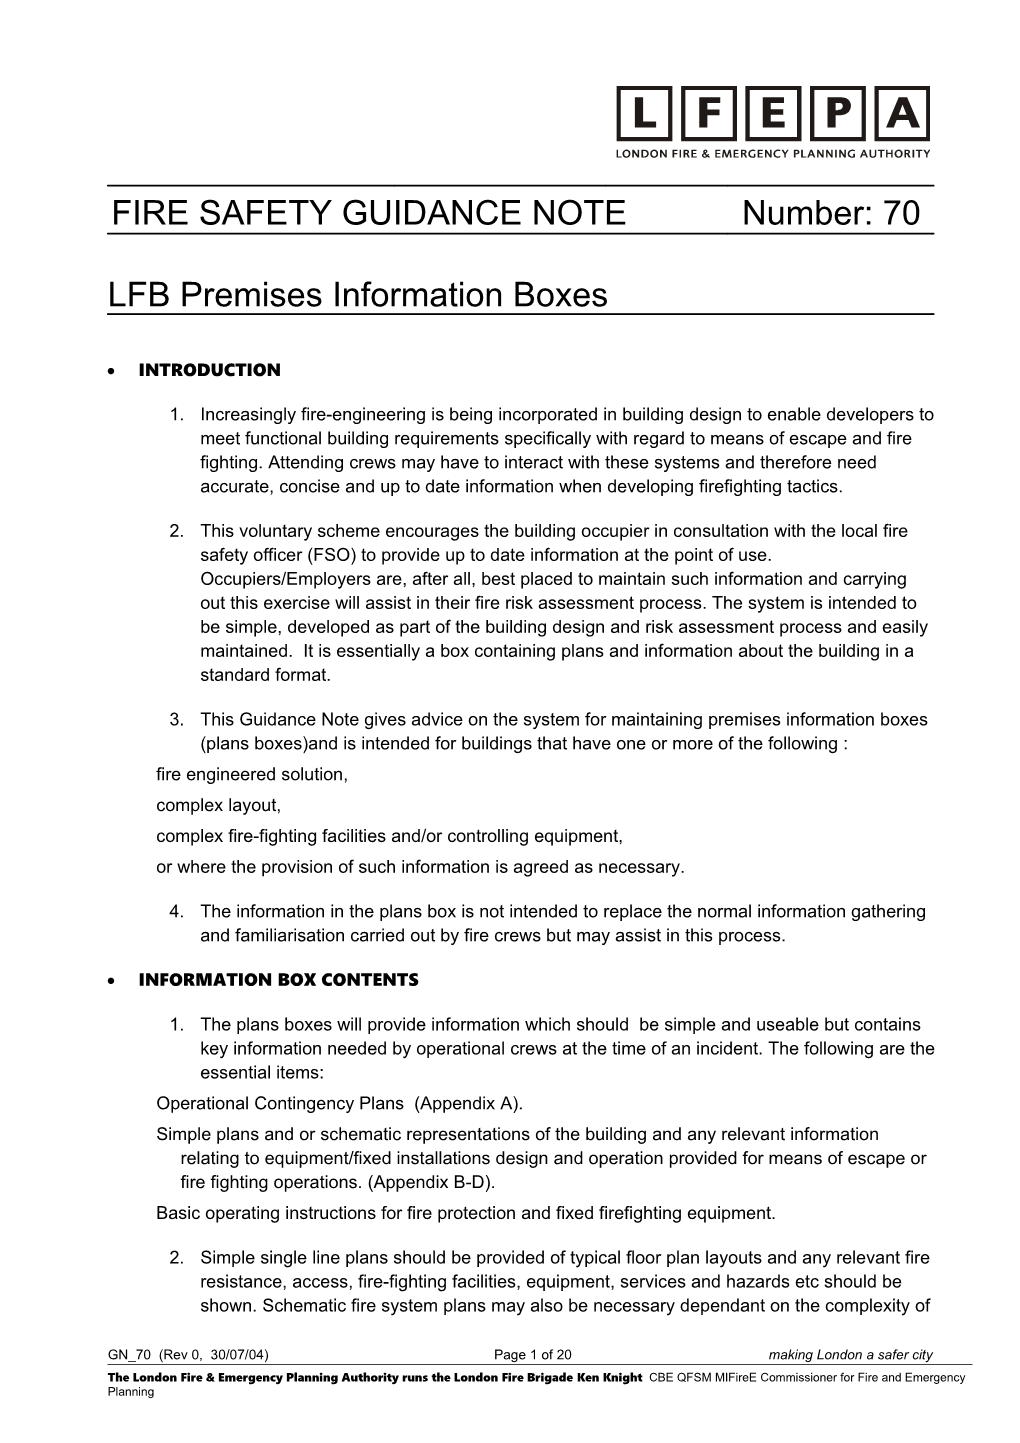 Fire Safety Guidance Note No. 70, LFB Premises Information Boxes